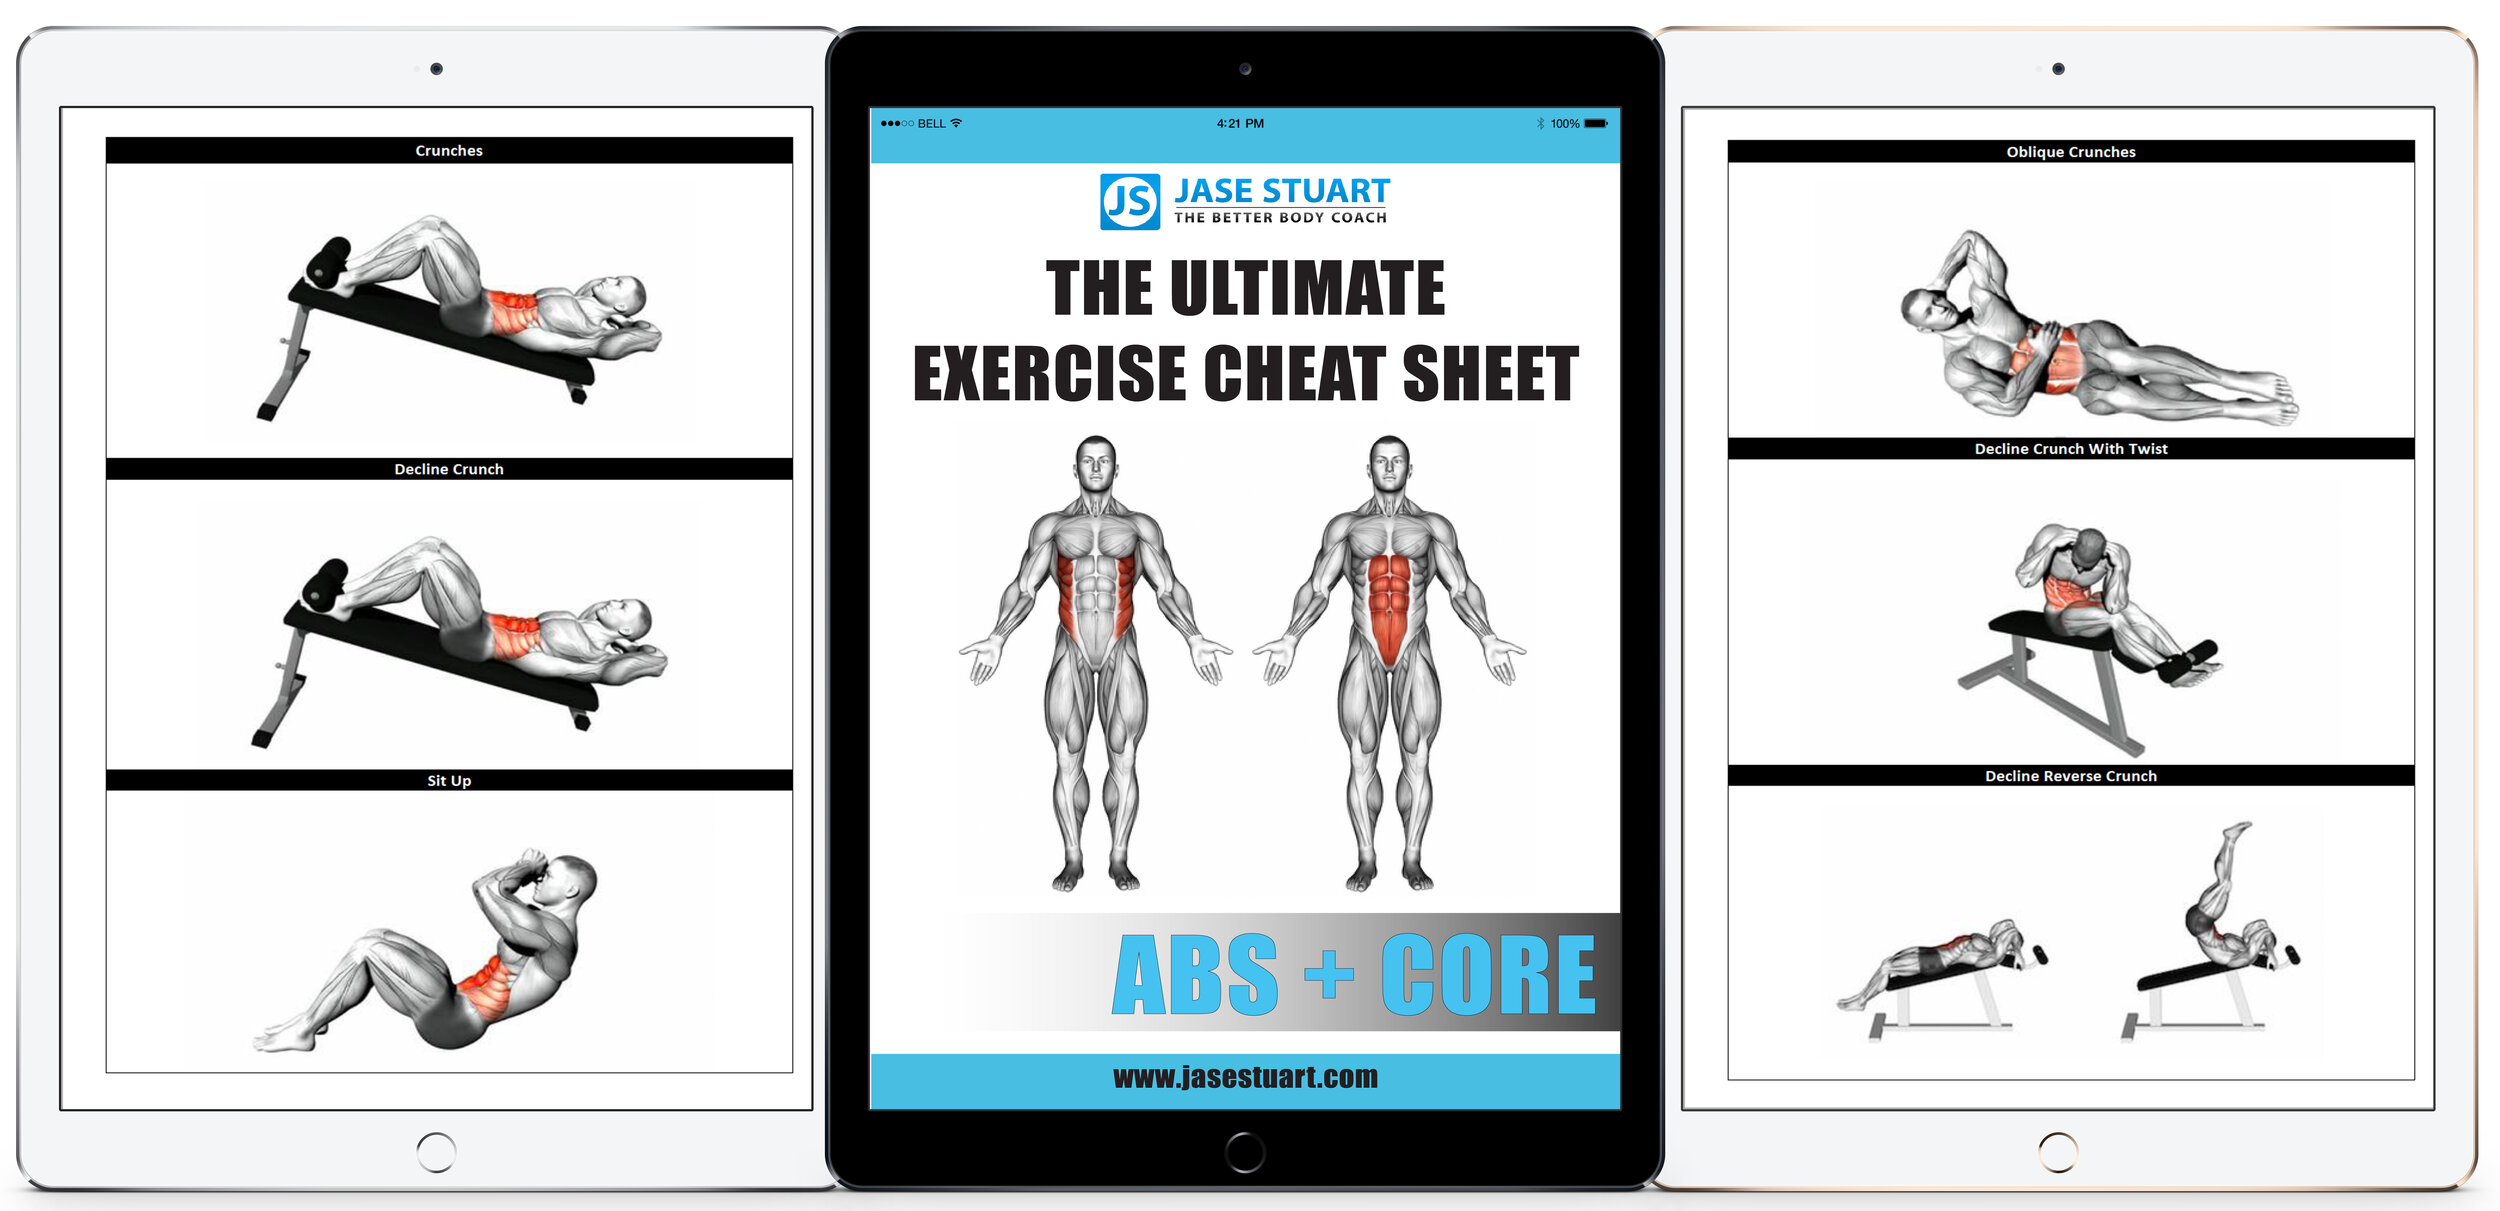 Ultimate Exercise Guide - Abs + Core.jpg